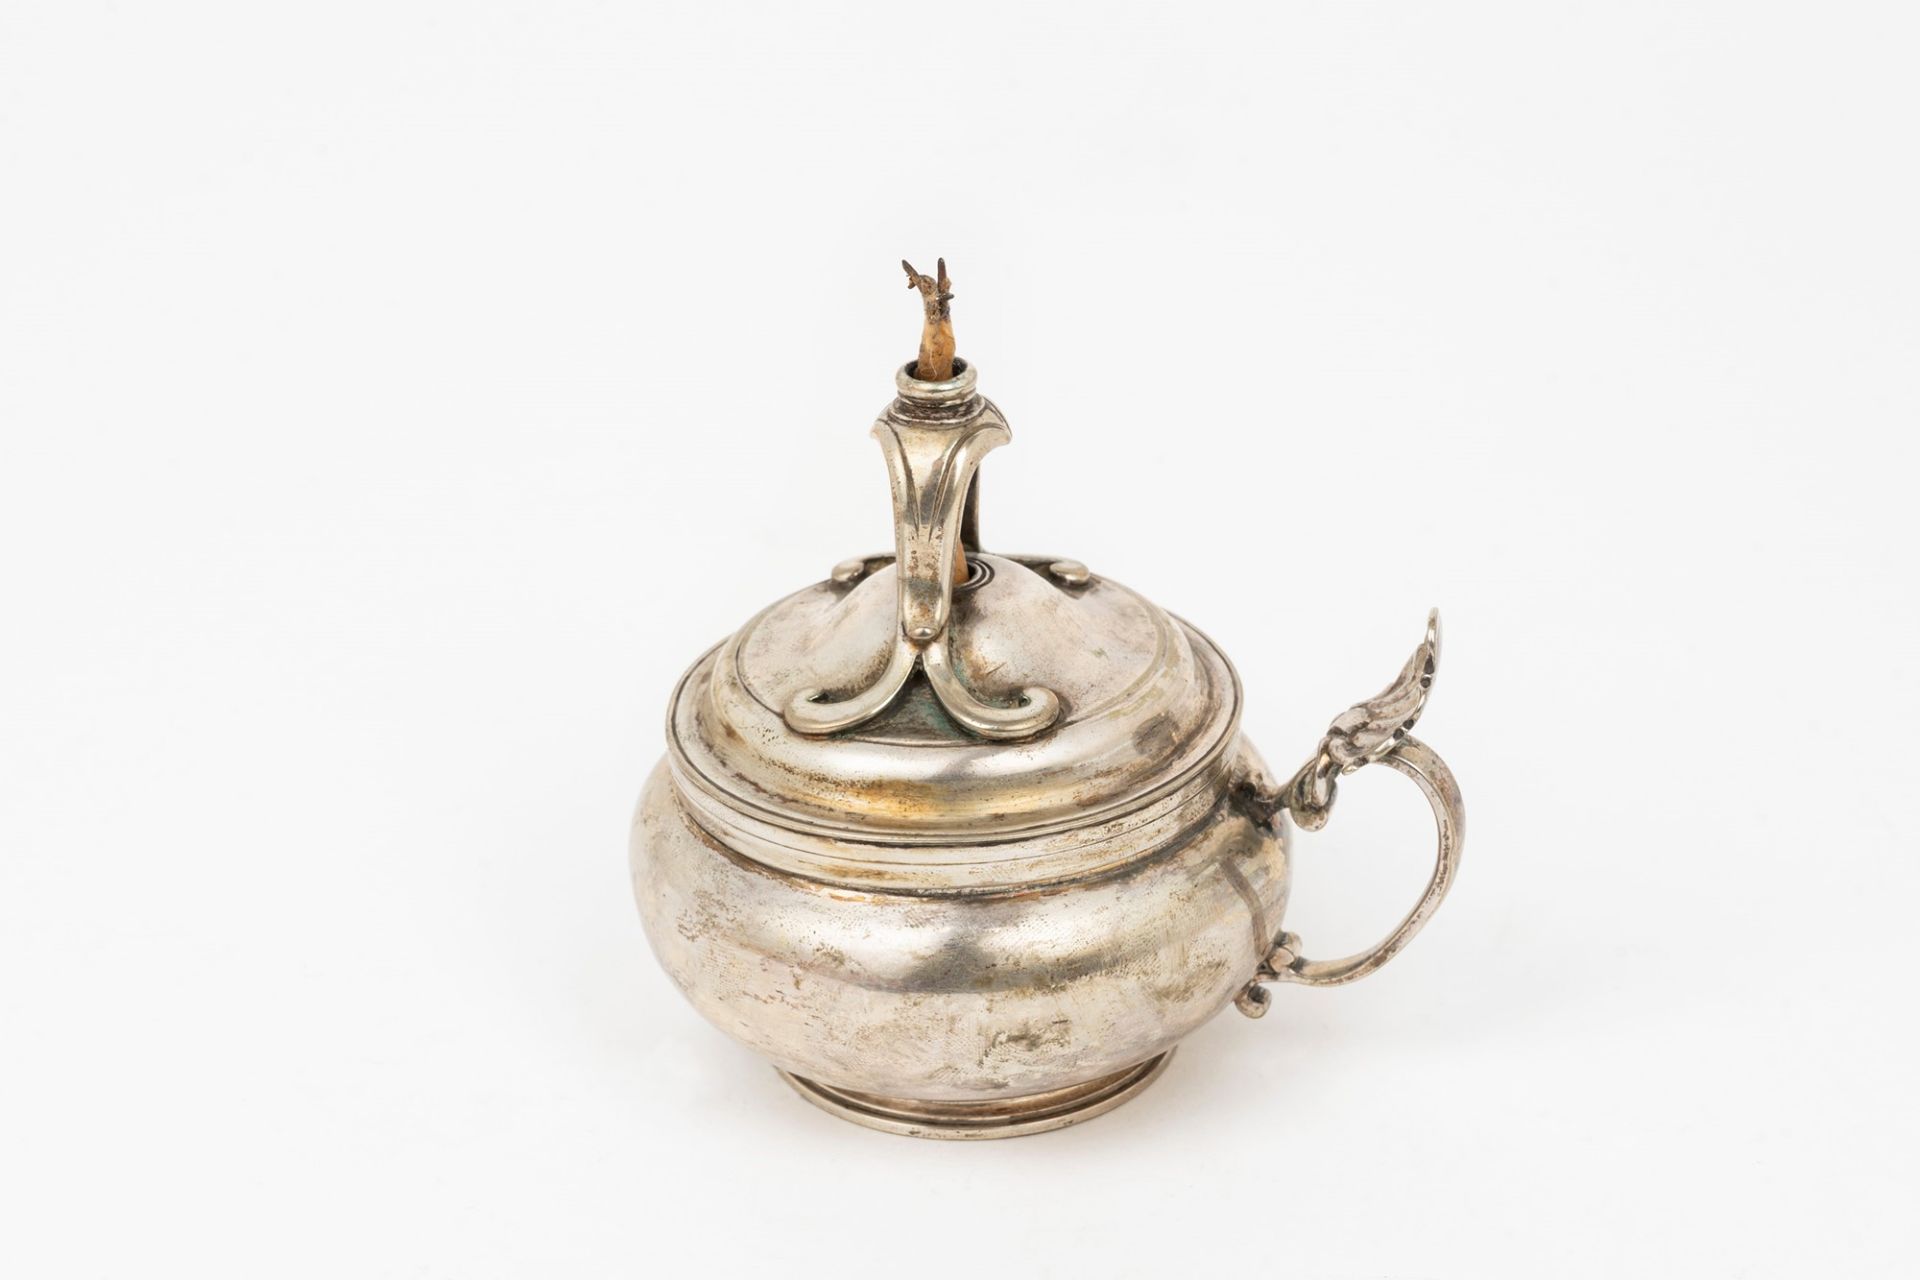 Silver wick, late 18th century - early 19th century